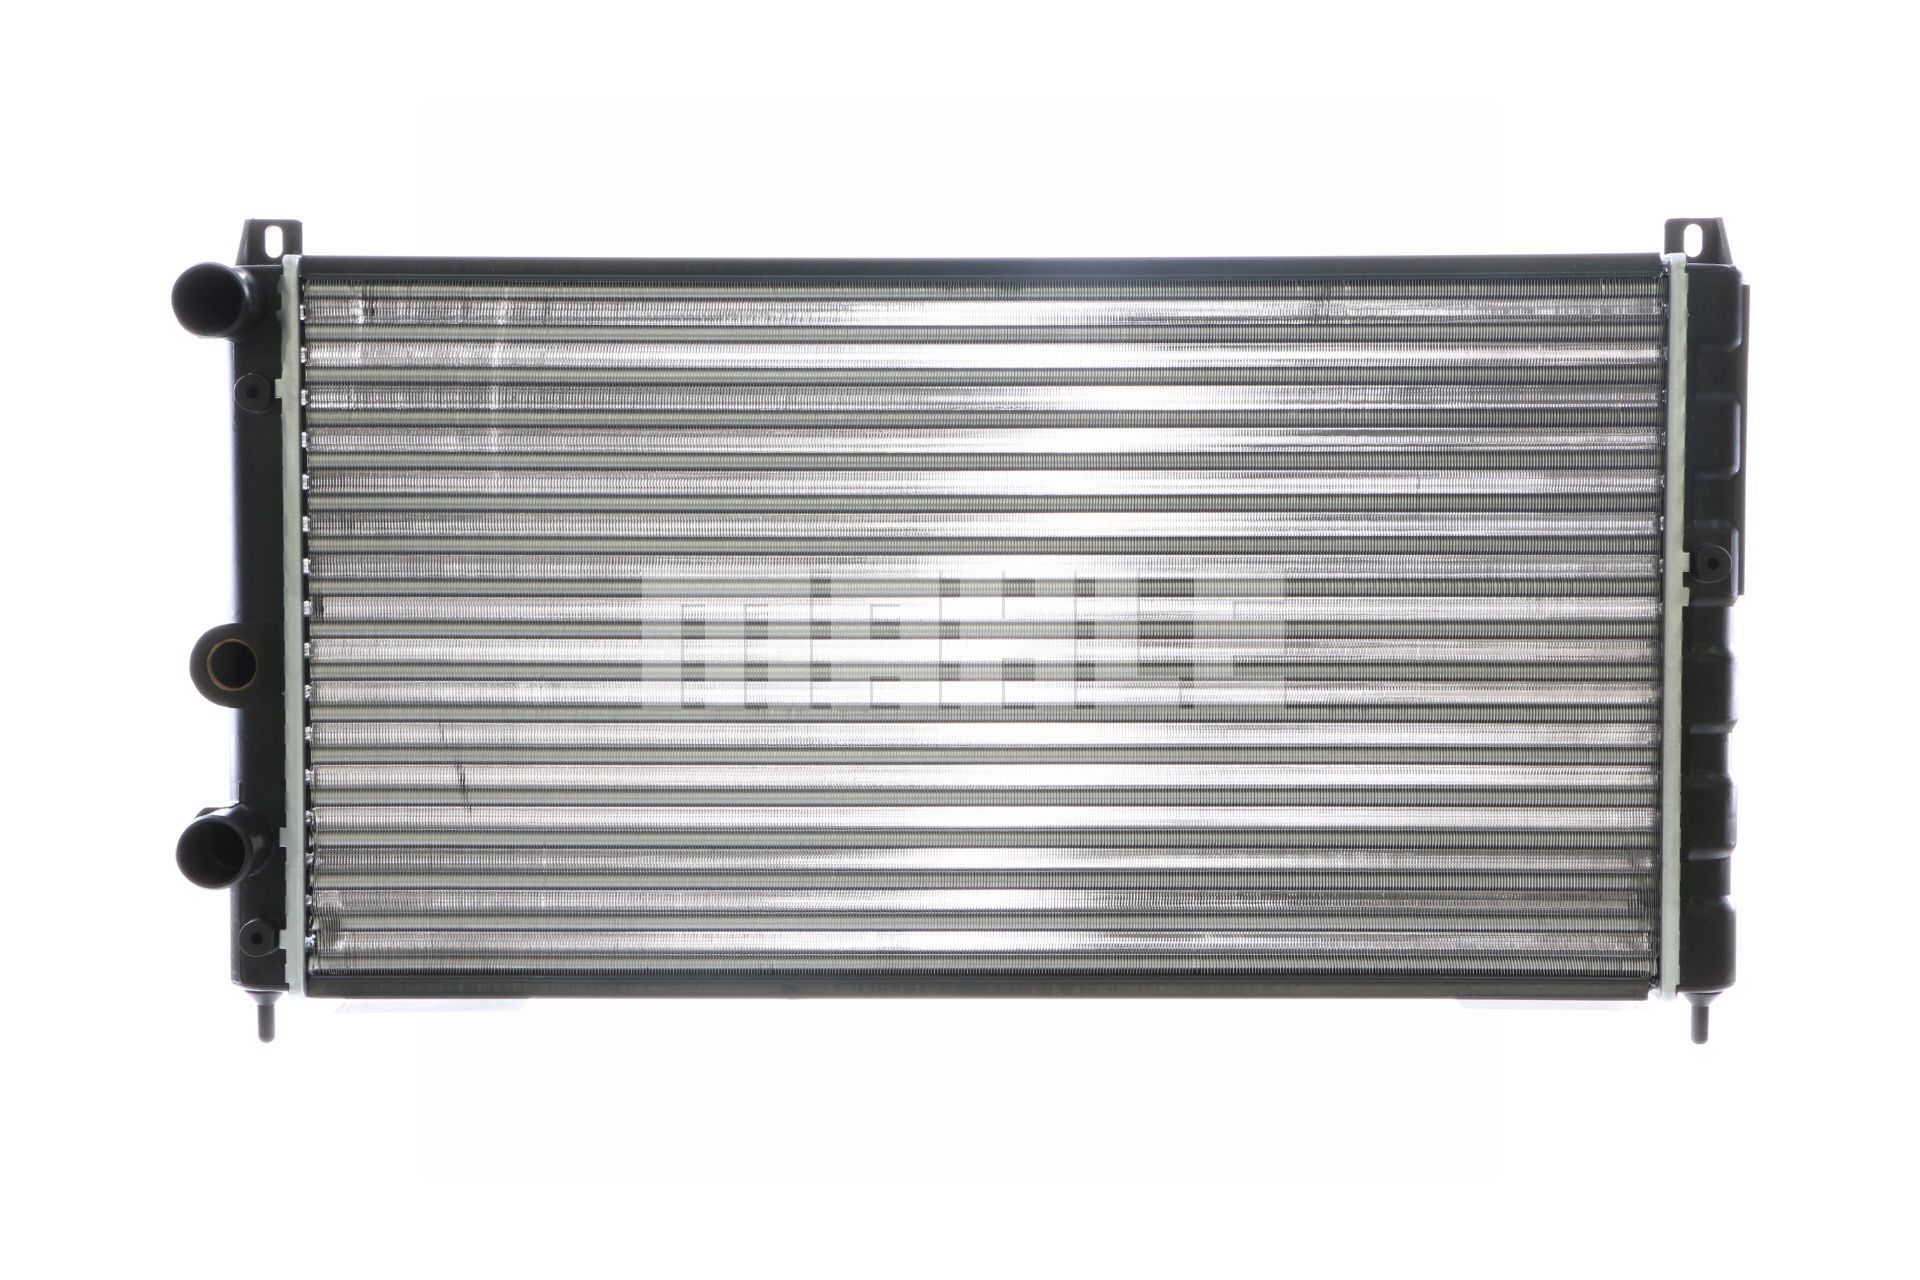 MAHLE ORIGINAL CR 405 000S Engine radiator 590 x 322 x 34 mm, Manual Transmission, Mechanically jointed cooling fins